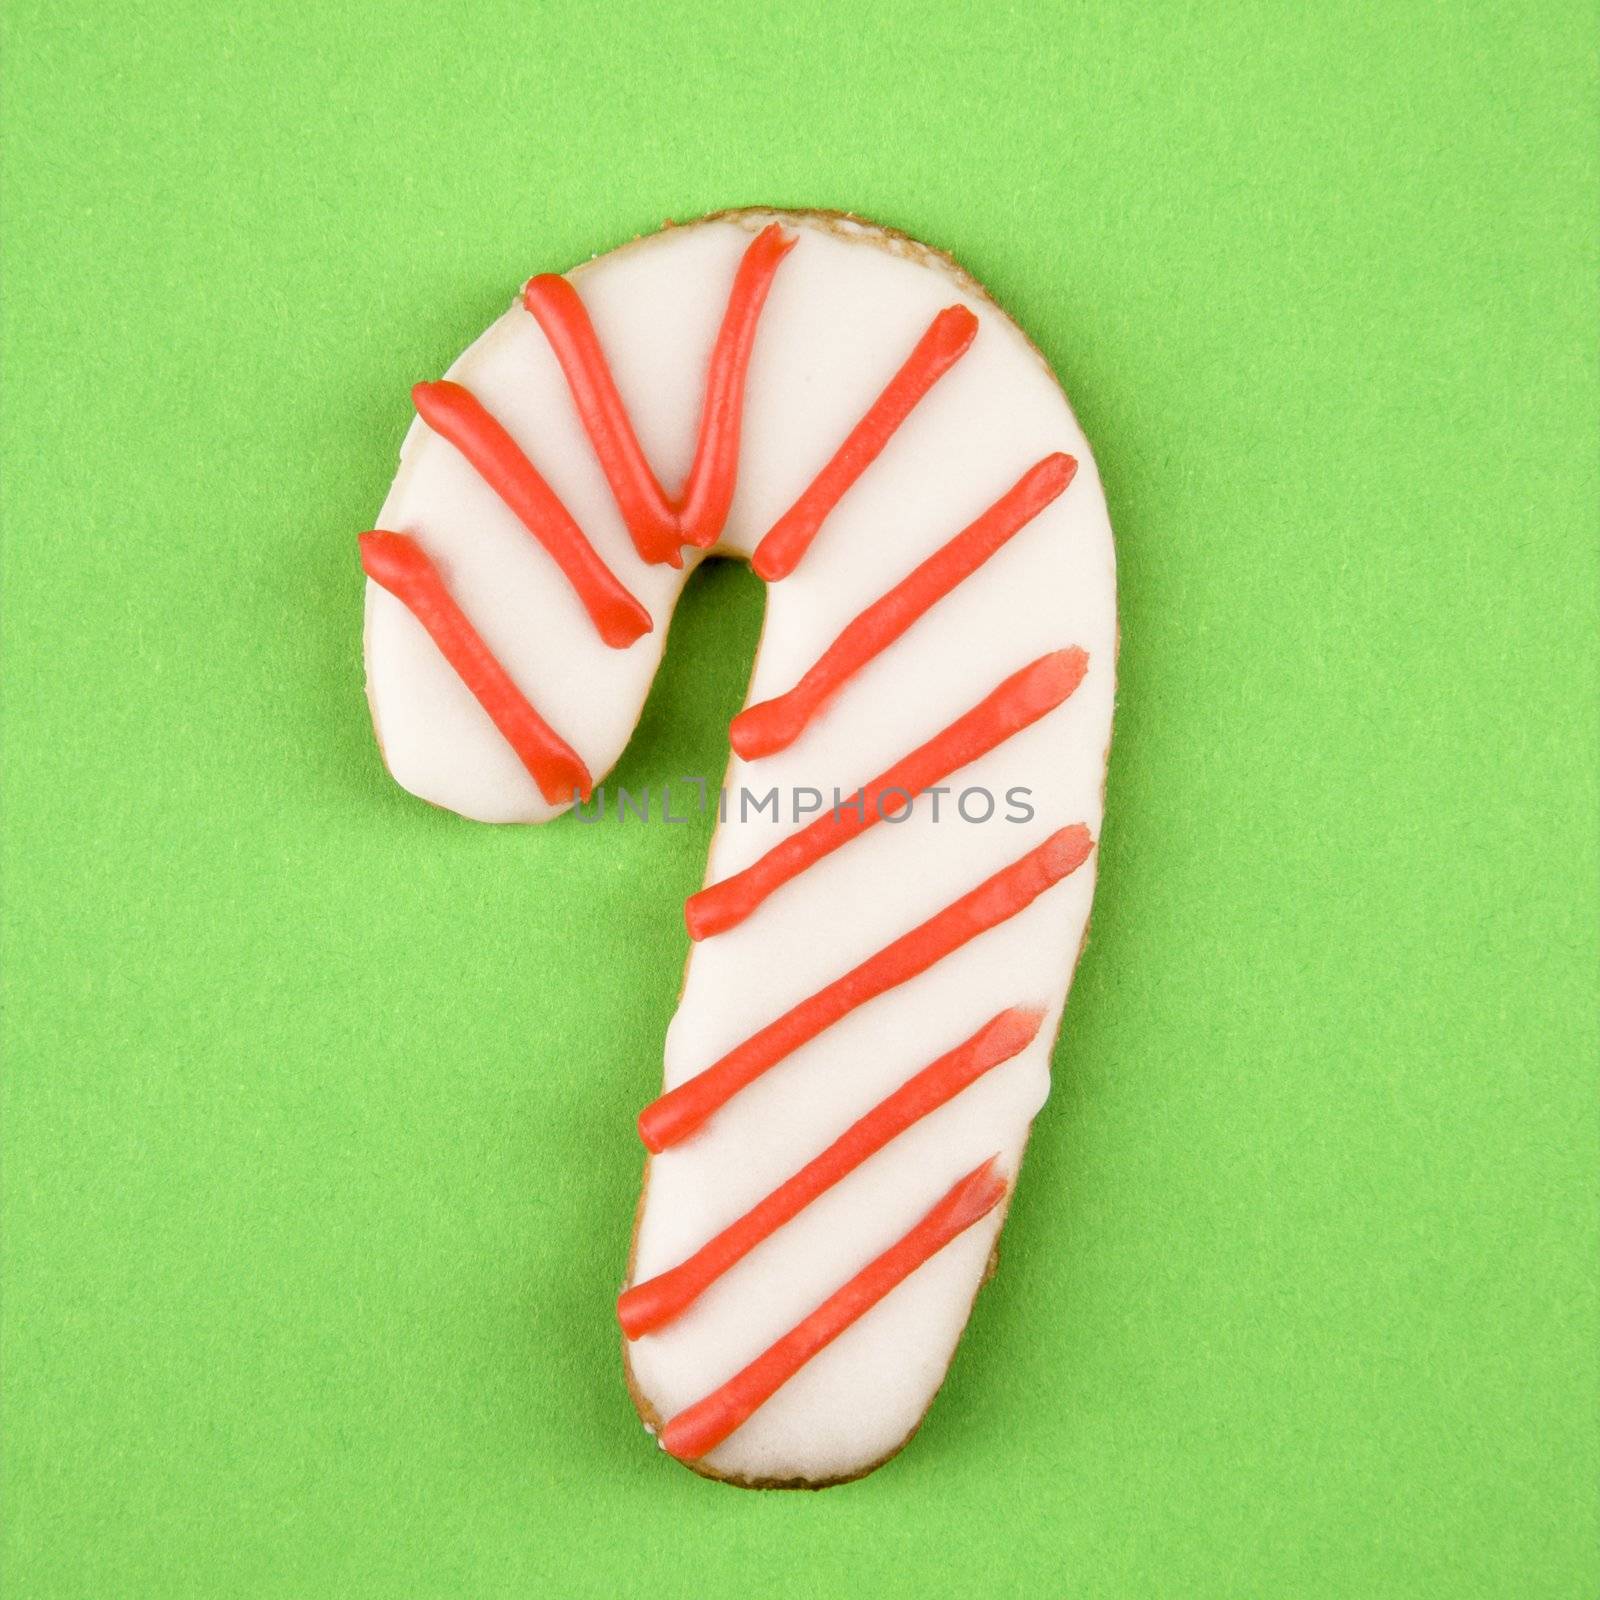 Candy cane sugar cookie with decorative icing.